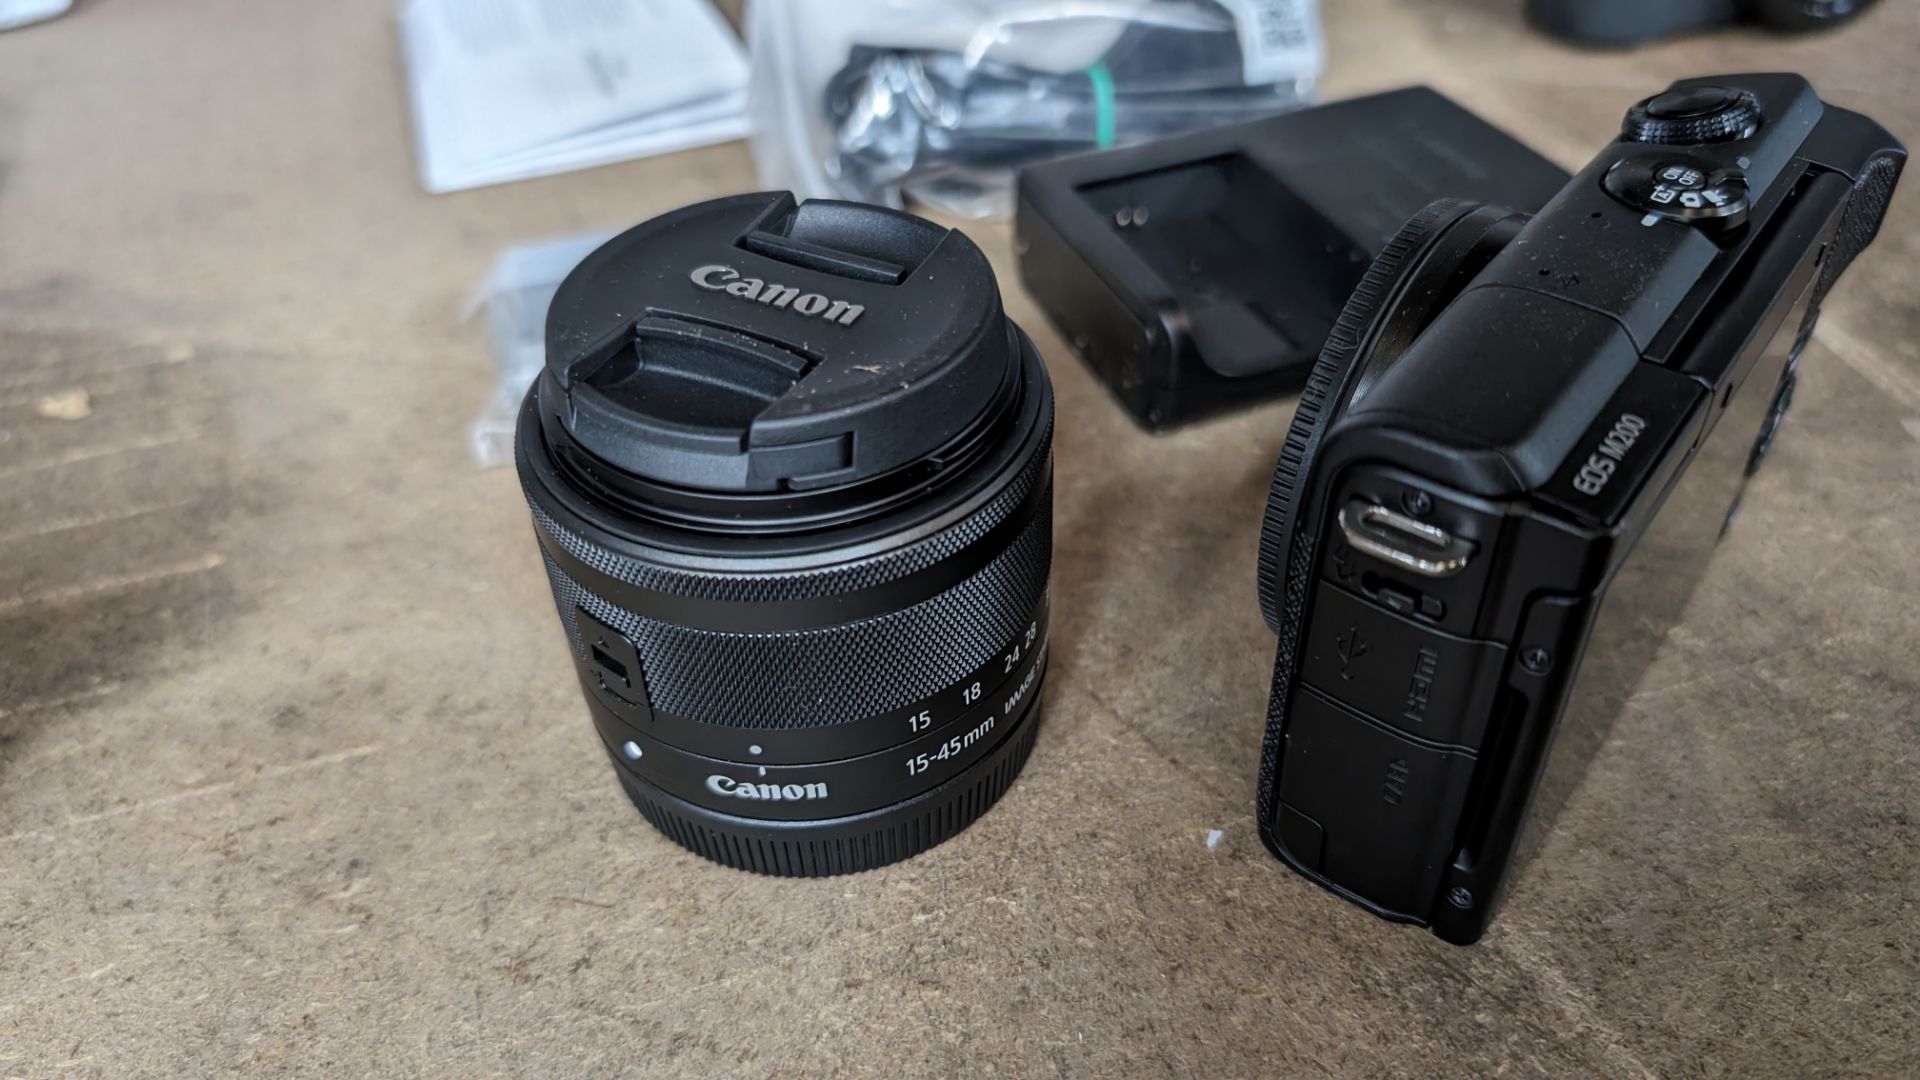 Canon EOS M200 camera kit, including 15-45mm image stabilizer lens, plus battery and charger - Image 9 of 12